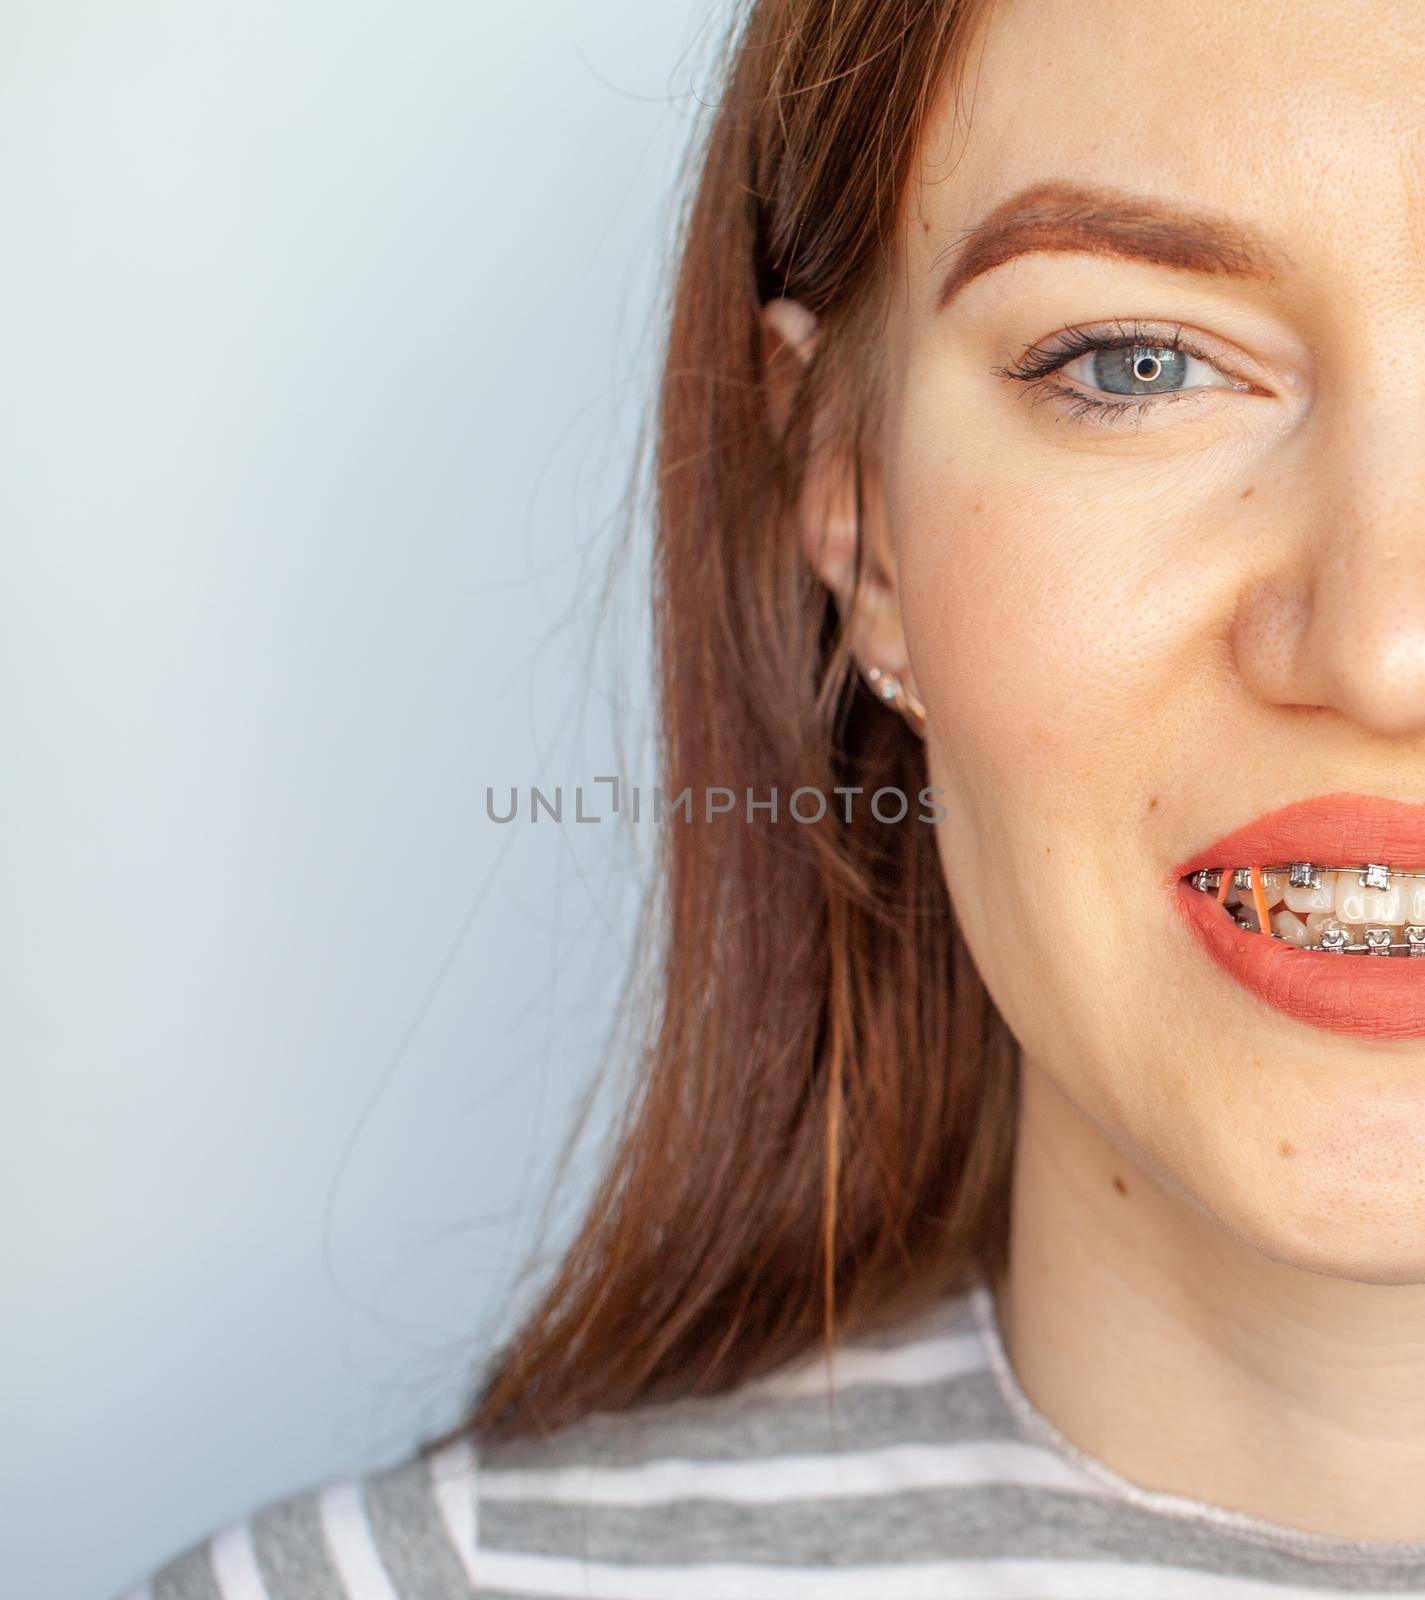 Braces in the smiling mouth of a girl. Smooth teeth from braces. by AnatoliiFoto